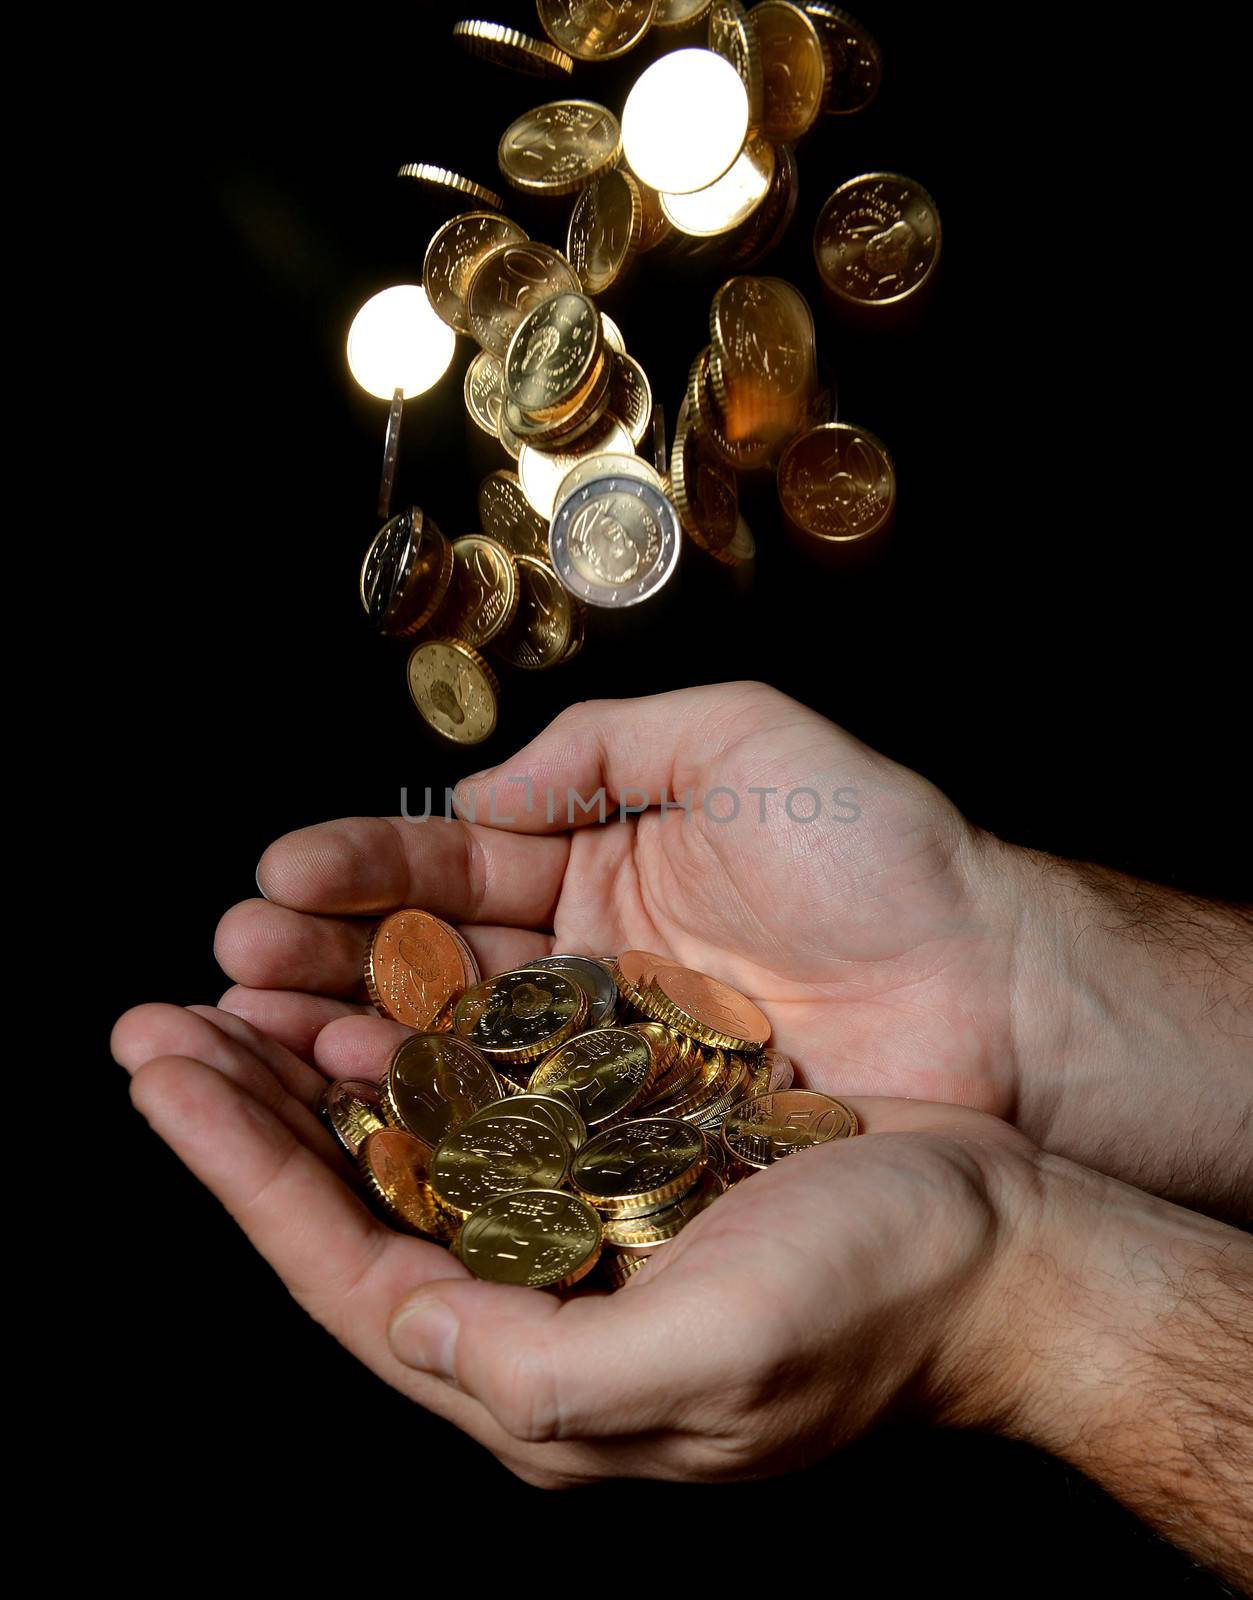 Man Hands full of money receiving a Rain of Coins isolated on black background